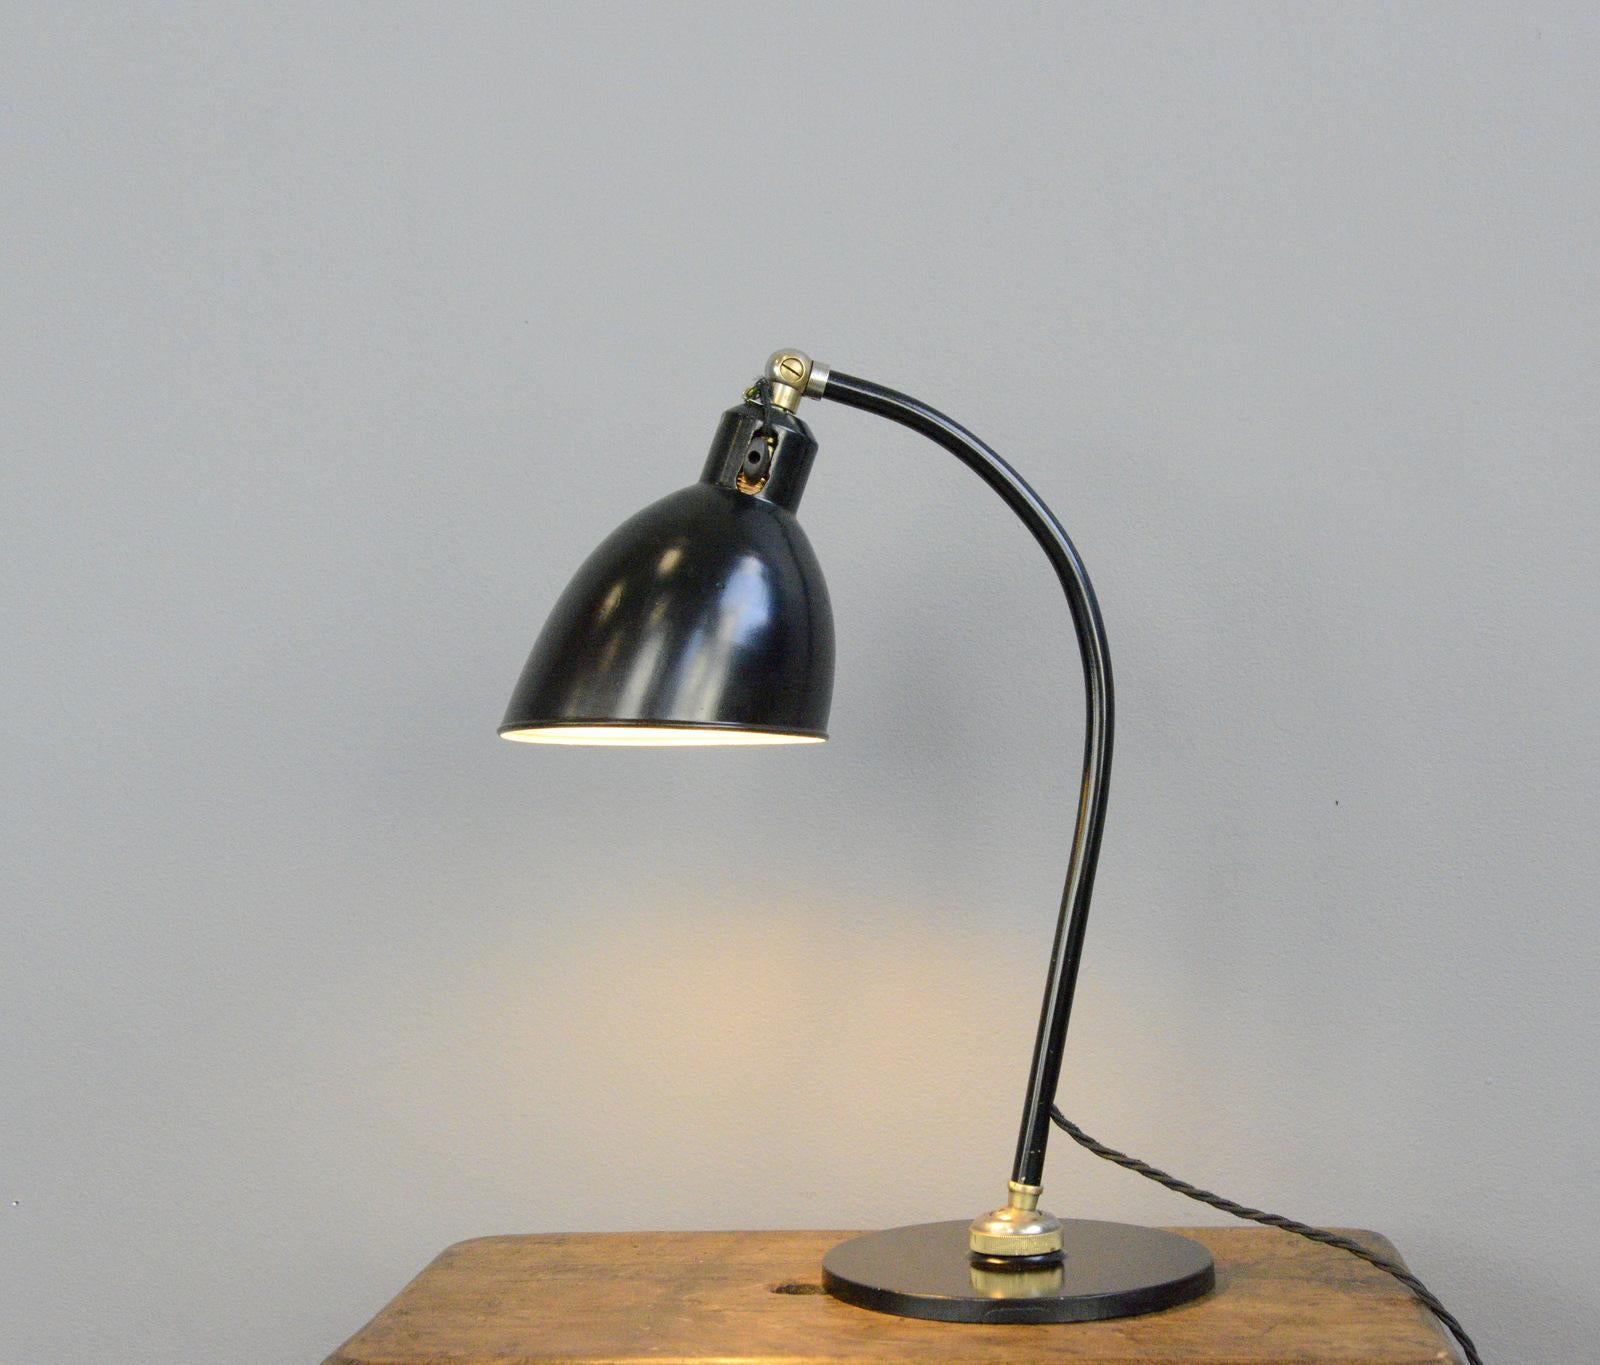 Bauhaus Polo Popular Desk Lamp by Christian Dell for Rondella